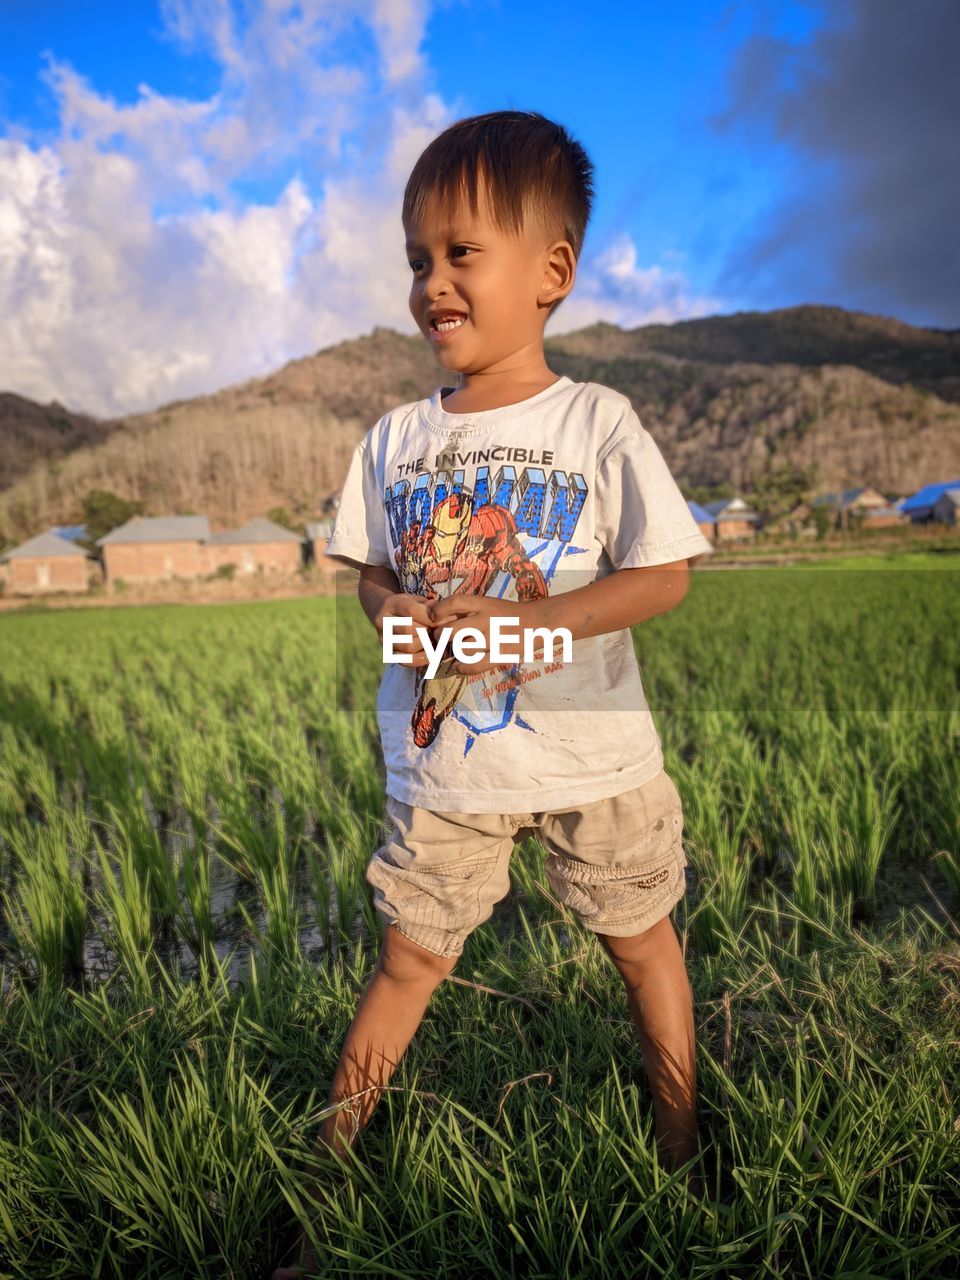 childhood, child, one person, men, land, nature, landscape, plant, field, sky, grass, full length, smiling, toddler, rural scene, cute, standing, happiness, casual clothing, agriculture, emotion, person, environment, portrait, meadow, outdoors, cloud, front view, day, food, leisure activity, innocence, growth, crop, beauty in nature, looking, food and drink, mountain, cheerful, lifestyles, blue